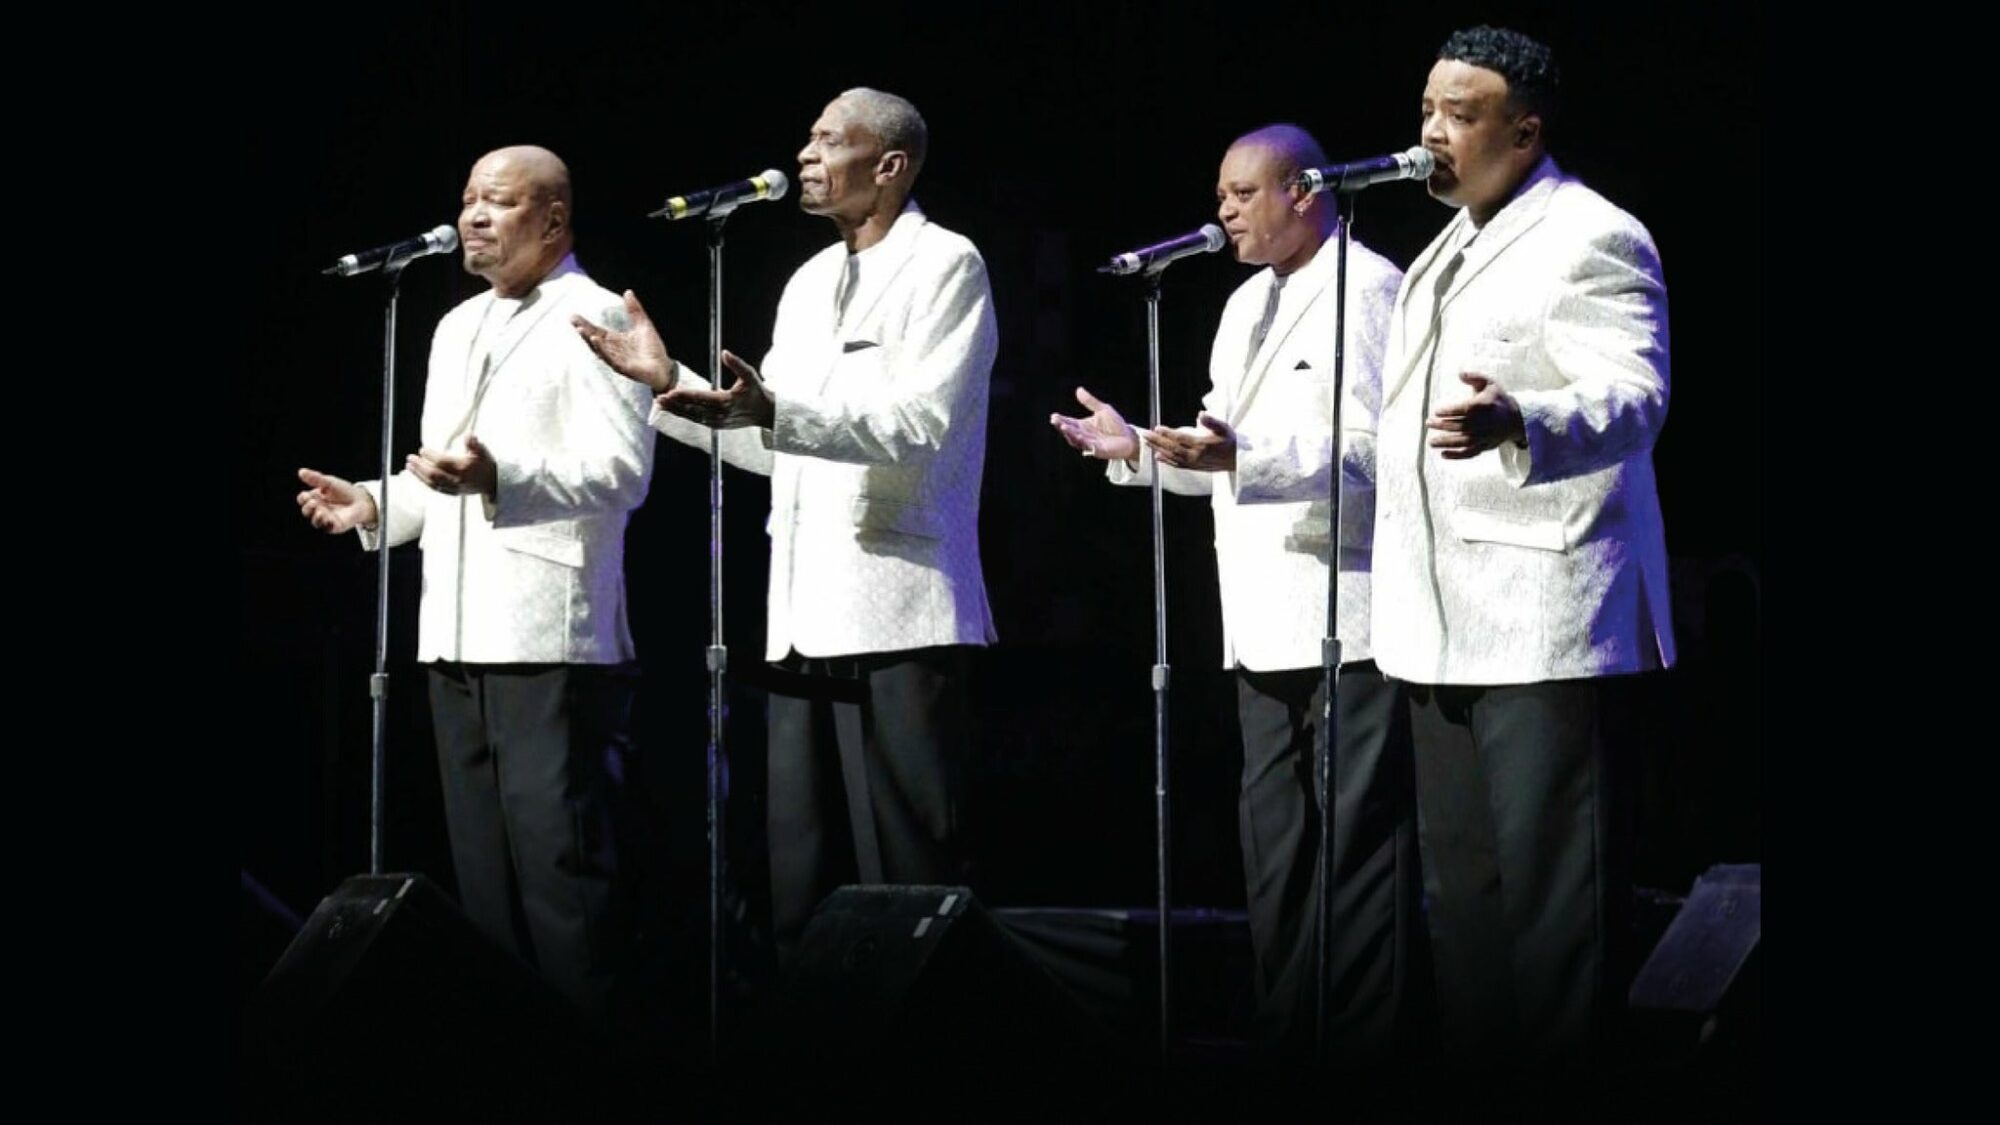 Image name The Stylistics at Sheffield City Hall Oval Hall Sheffield the 29 image from the post Events in Yorkshire.com.